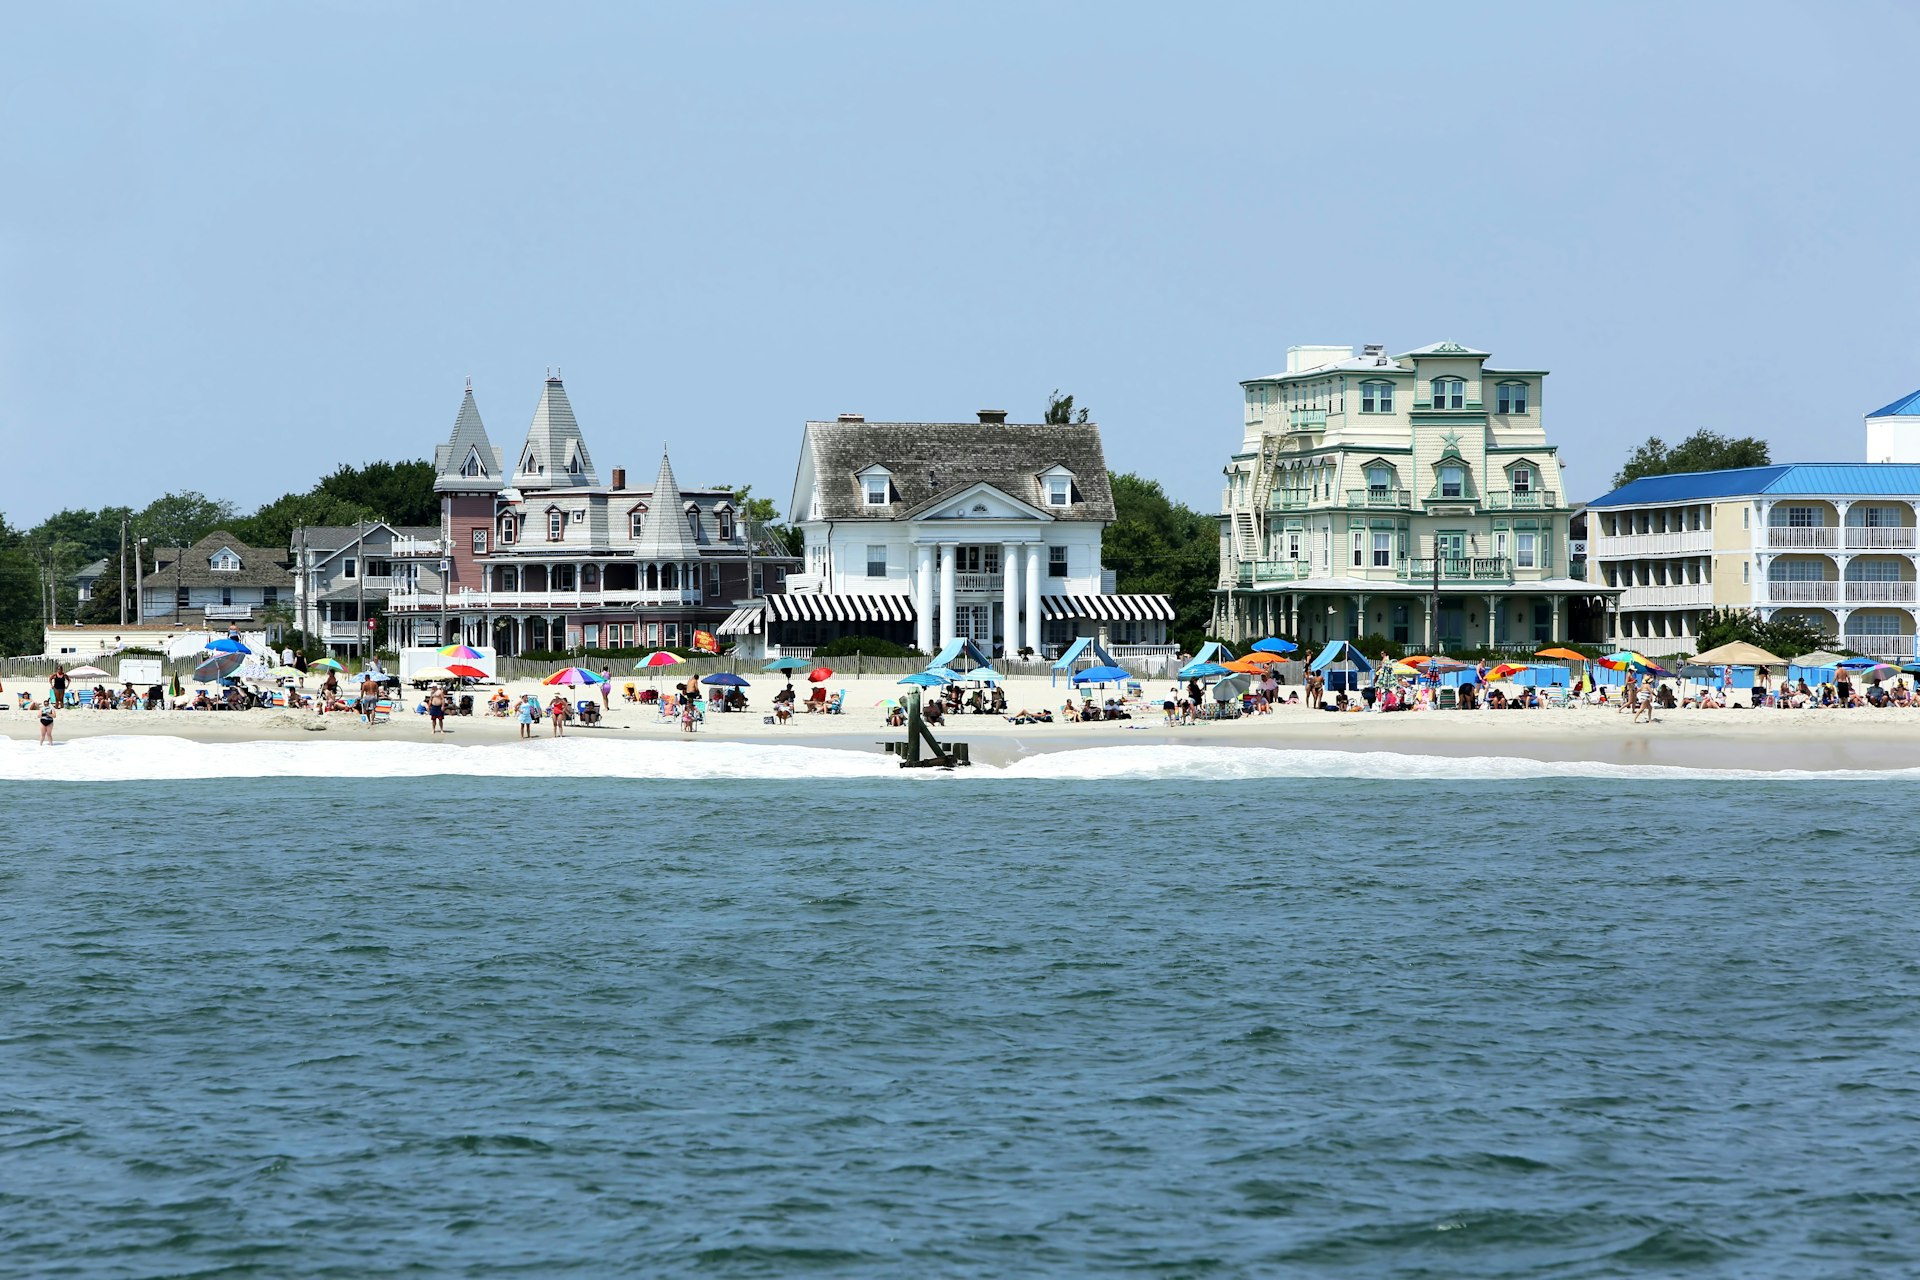 A shot of the shoreline taken from out at sea, showing Victorian buildings lining a beach filled with colorful umbrellas